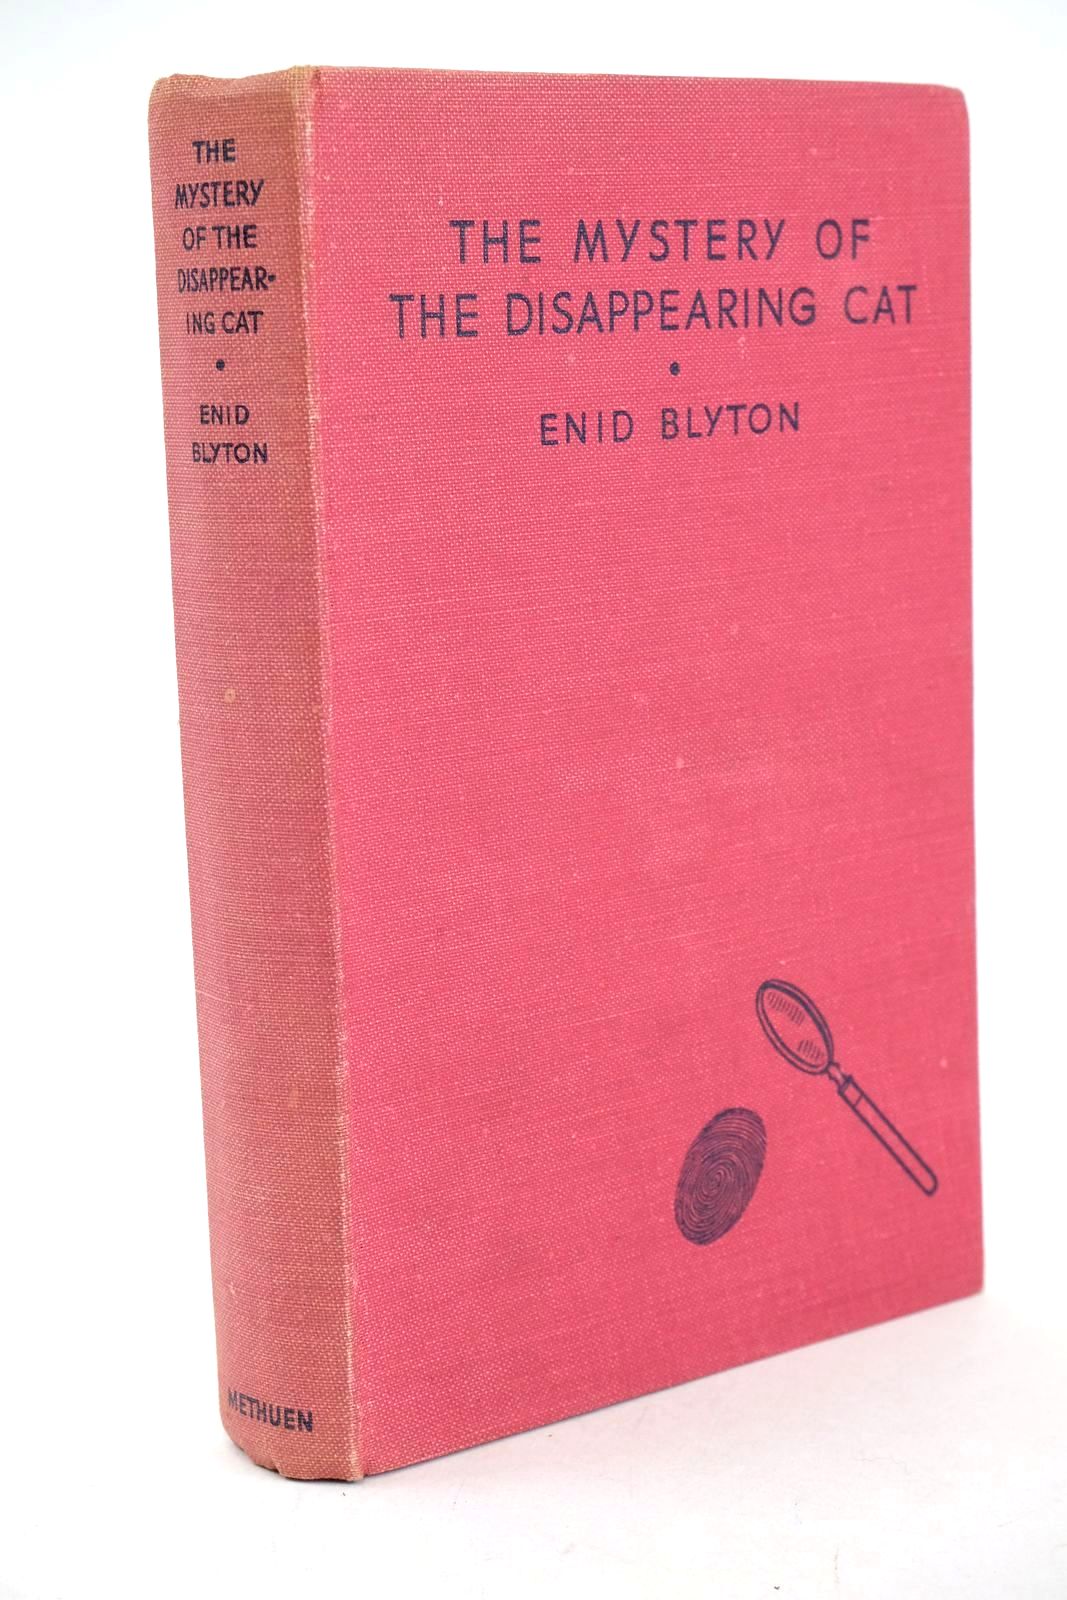 Photo of THE MYSTERY OF THE DISAPPEARING CAT written by Blyton, Enid illustrated by Abbey, J. published by Methuen &amp; Co. Ltd. (STOCK CODE: 1326825)  for sale by Stella & Rose's Books